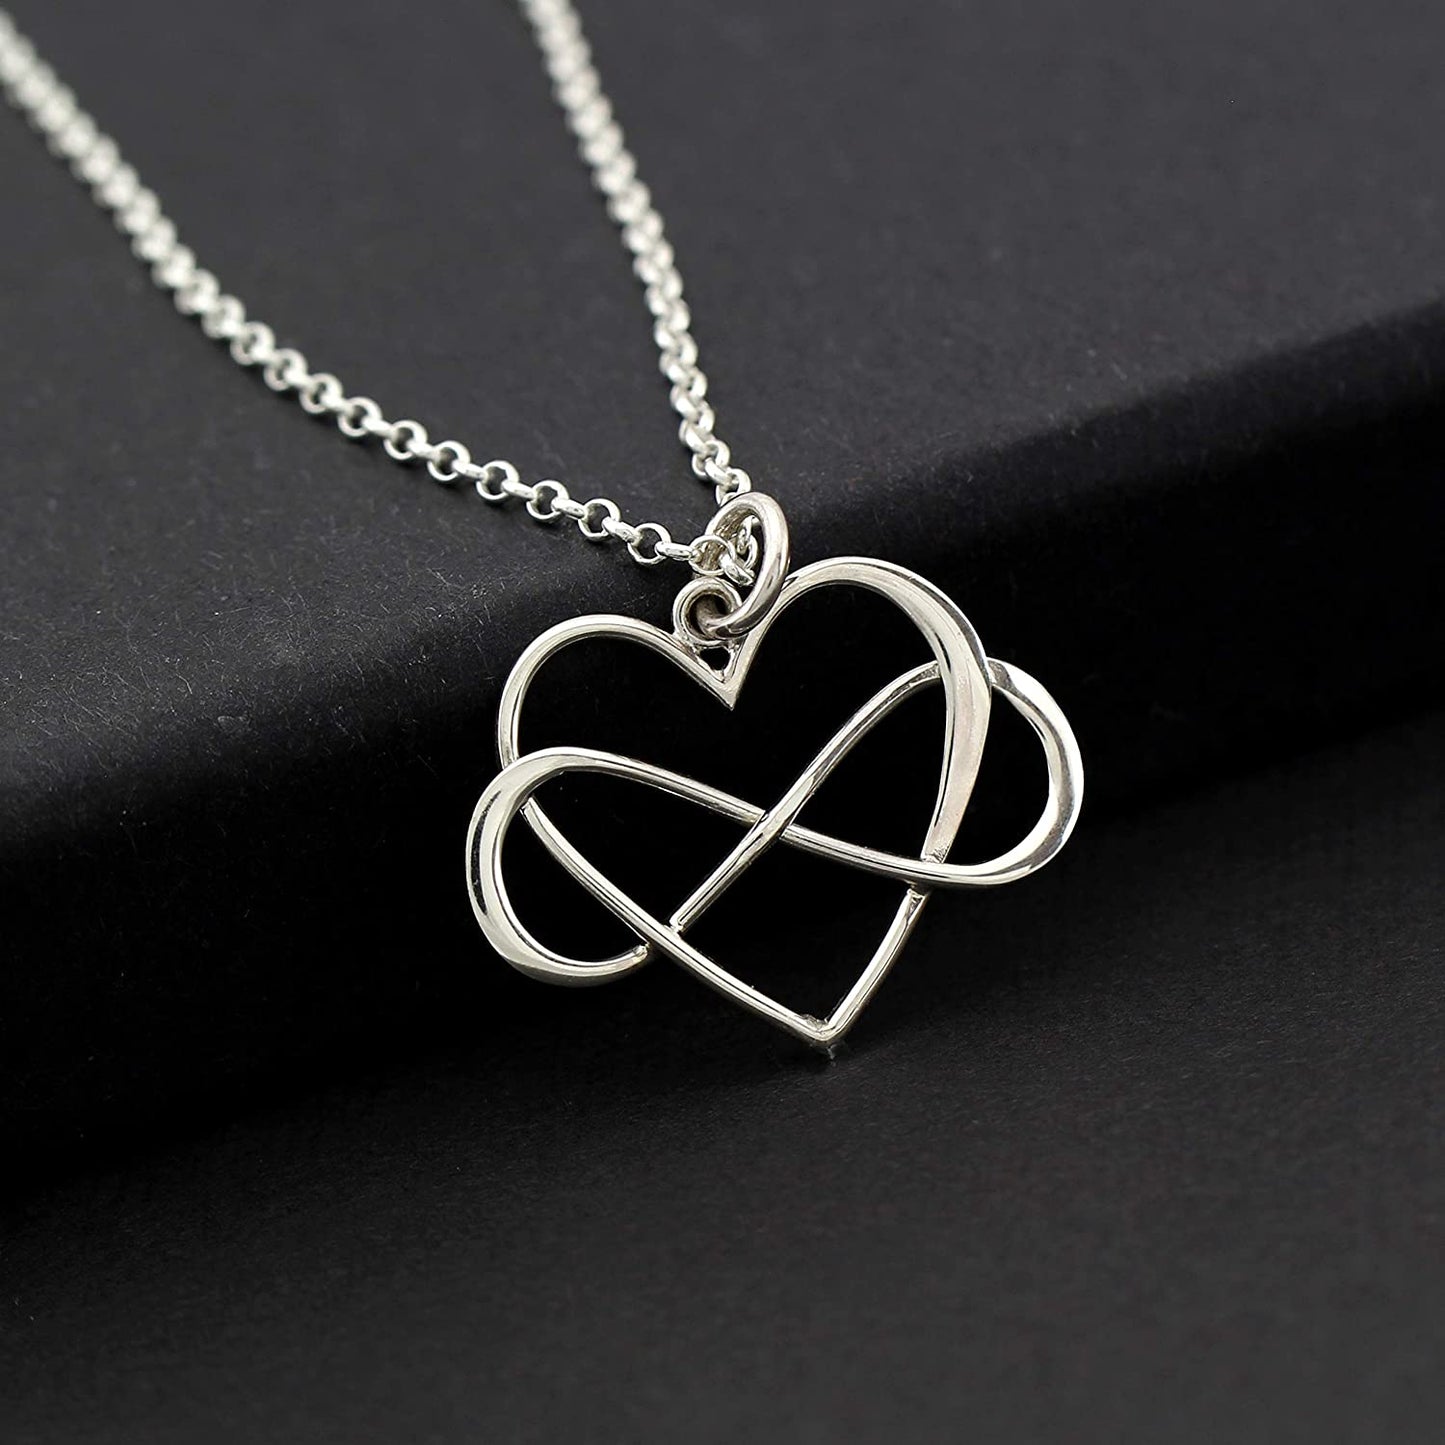 Gifts for Grandma and Grandson • Infinity Heart Charm • 925 Sterling Silver • Infinite Love Necklace